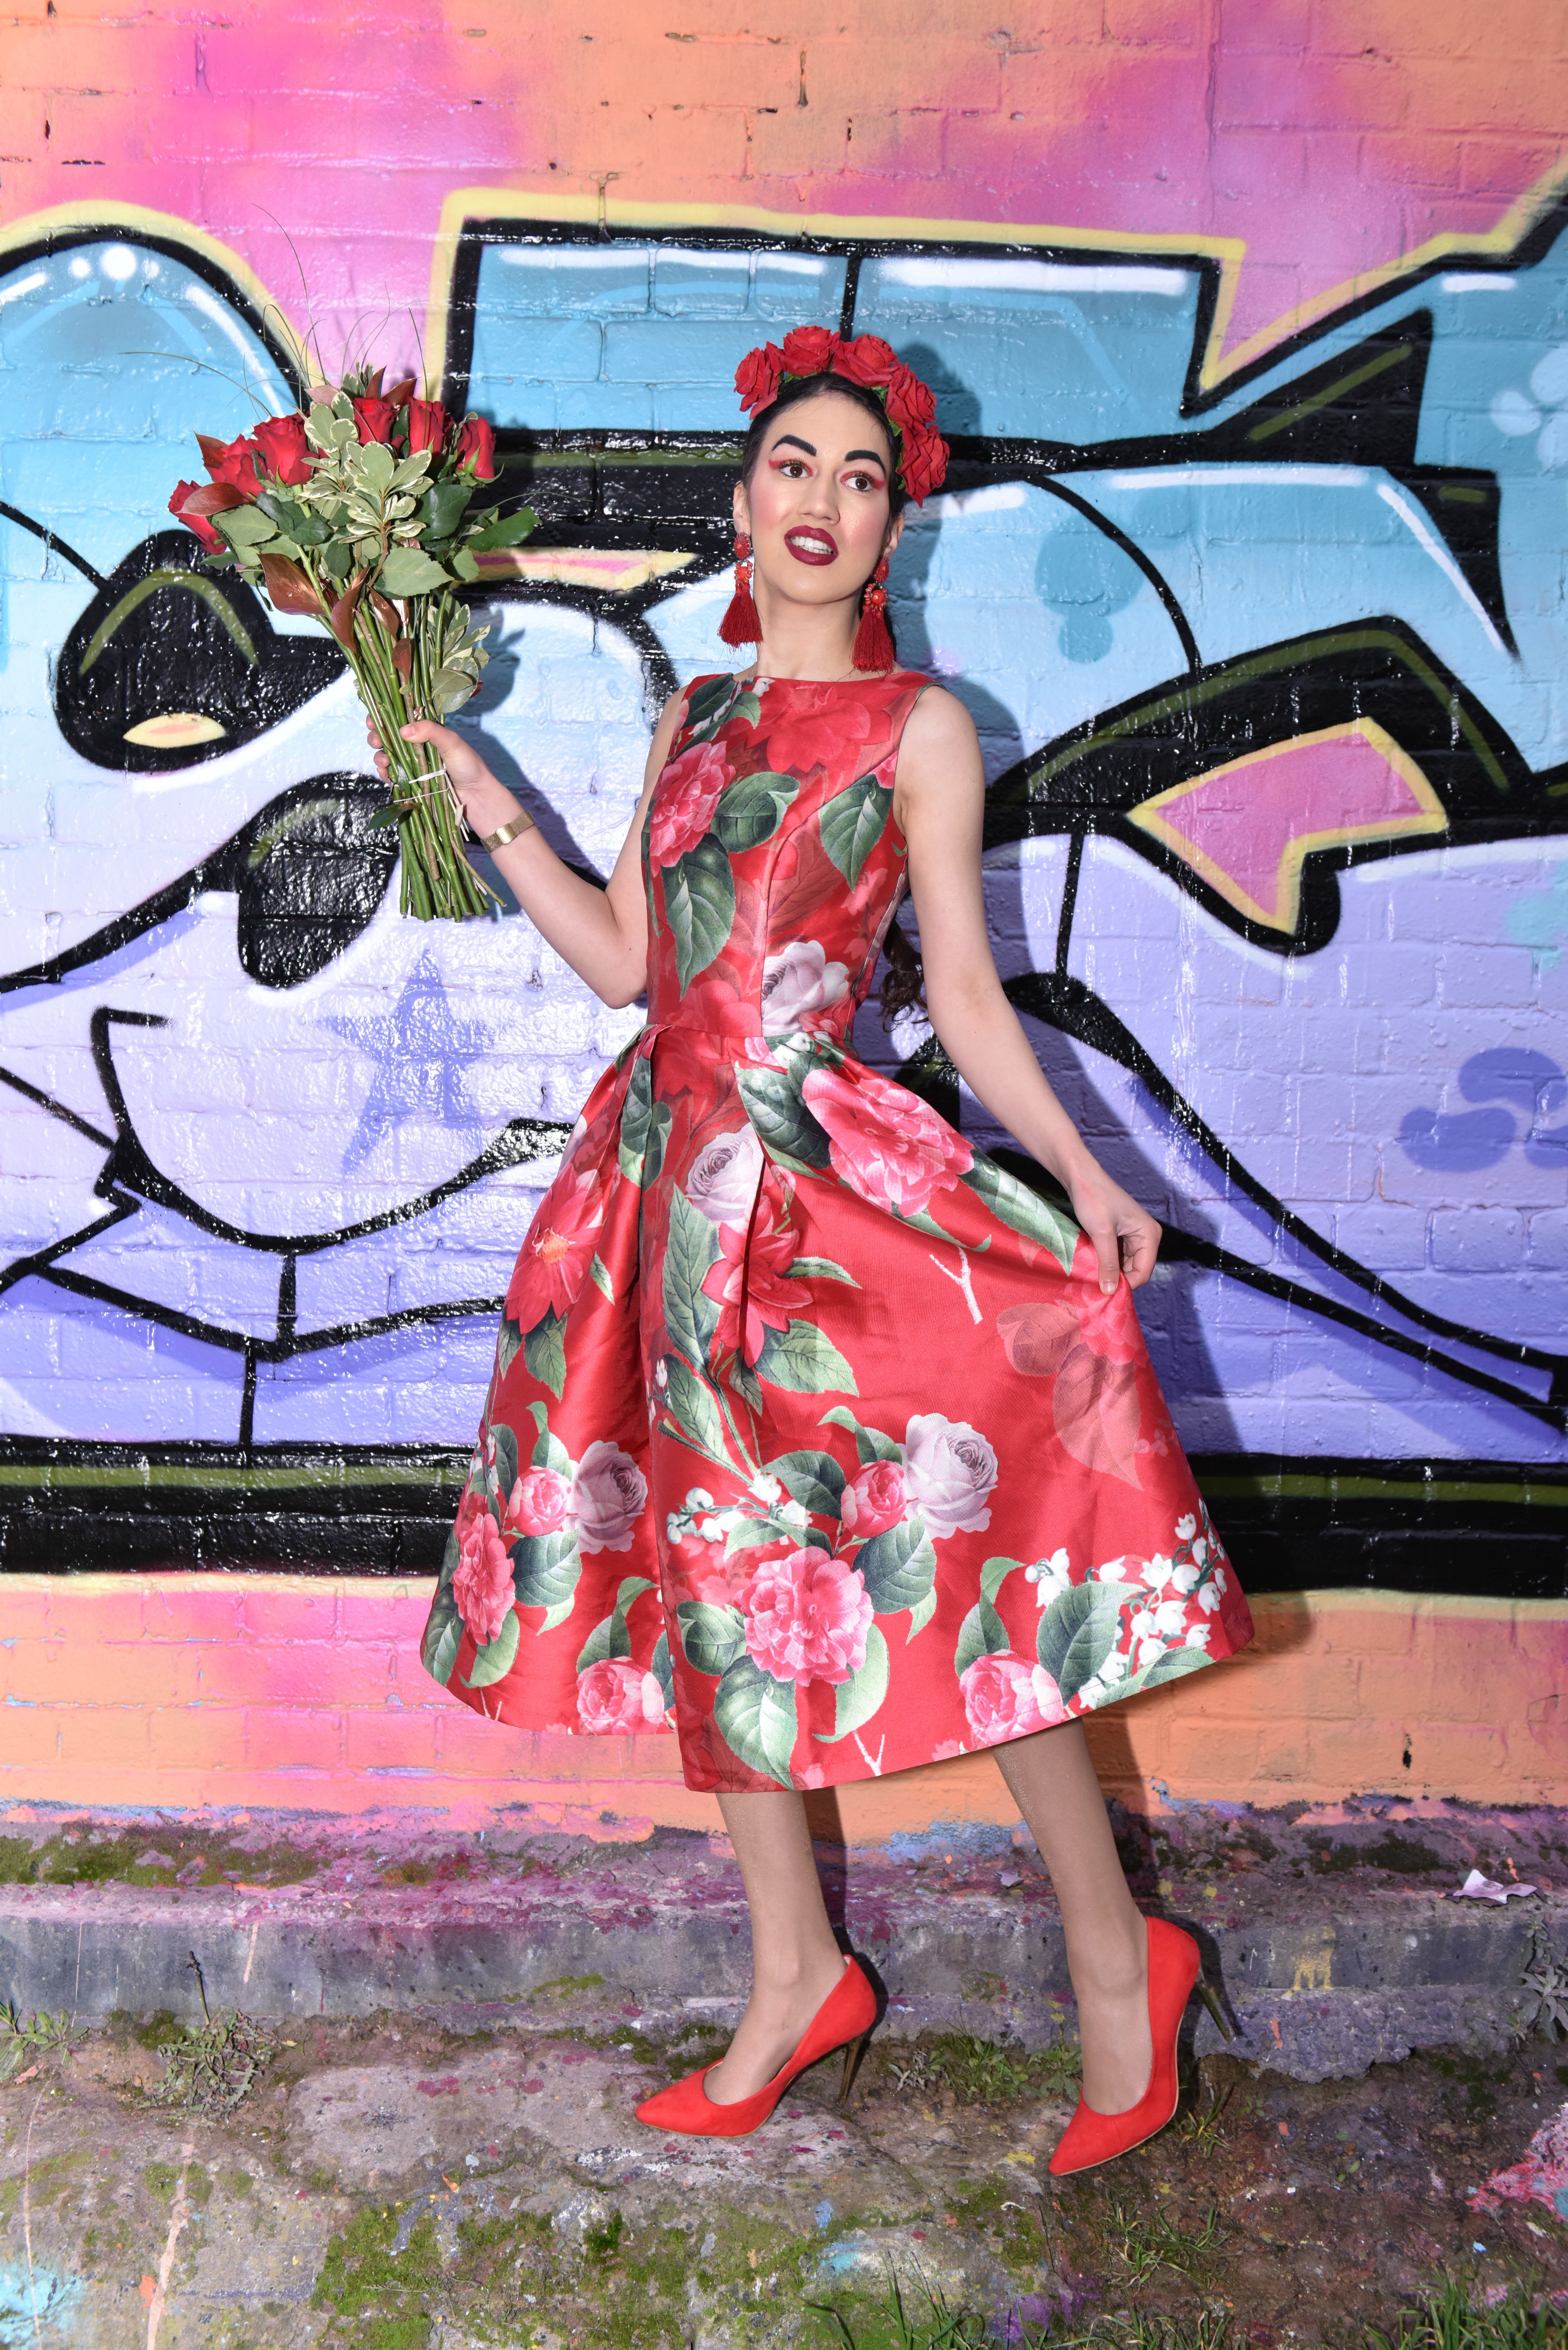 <img src="ana.jpg" alt="ana with rose bouquet midi dress dating dos and dont's"/> 